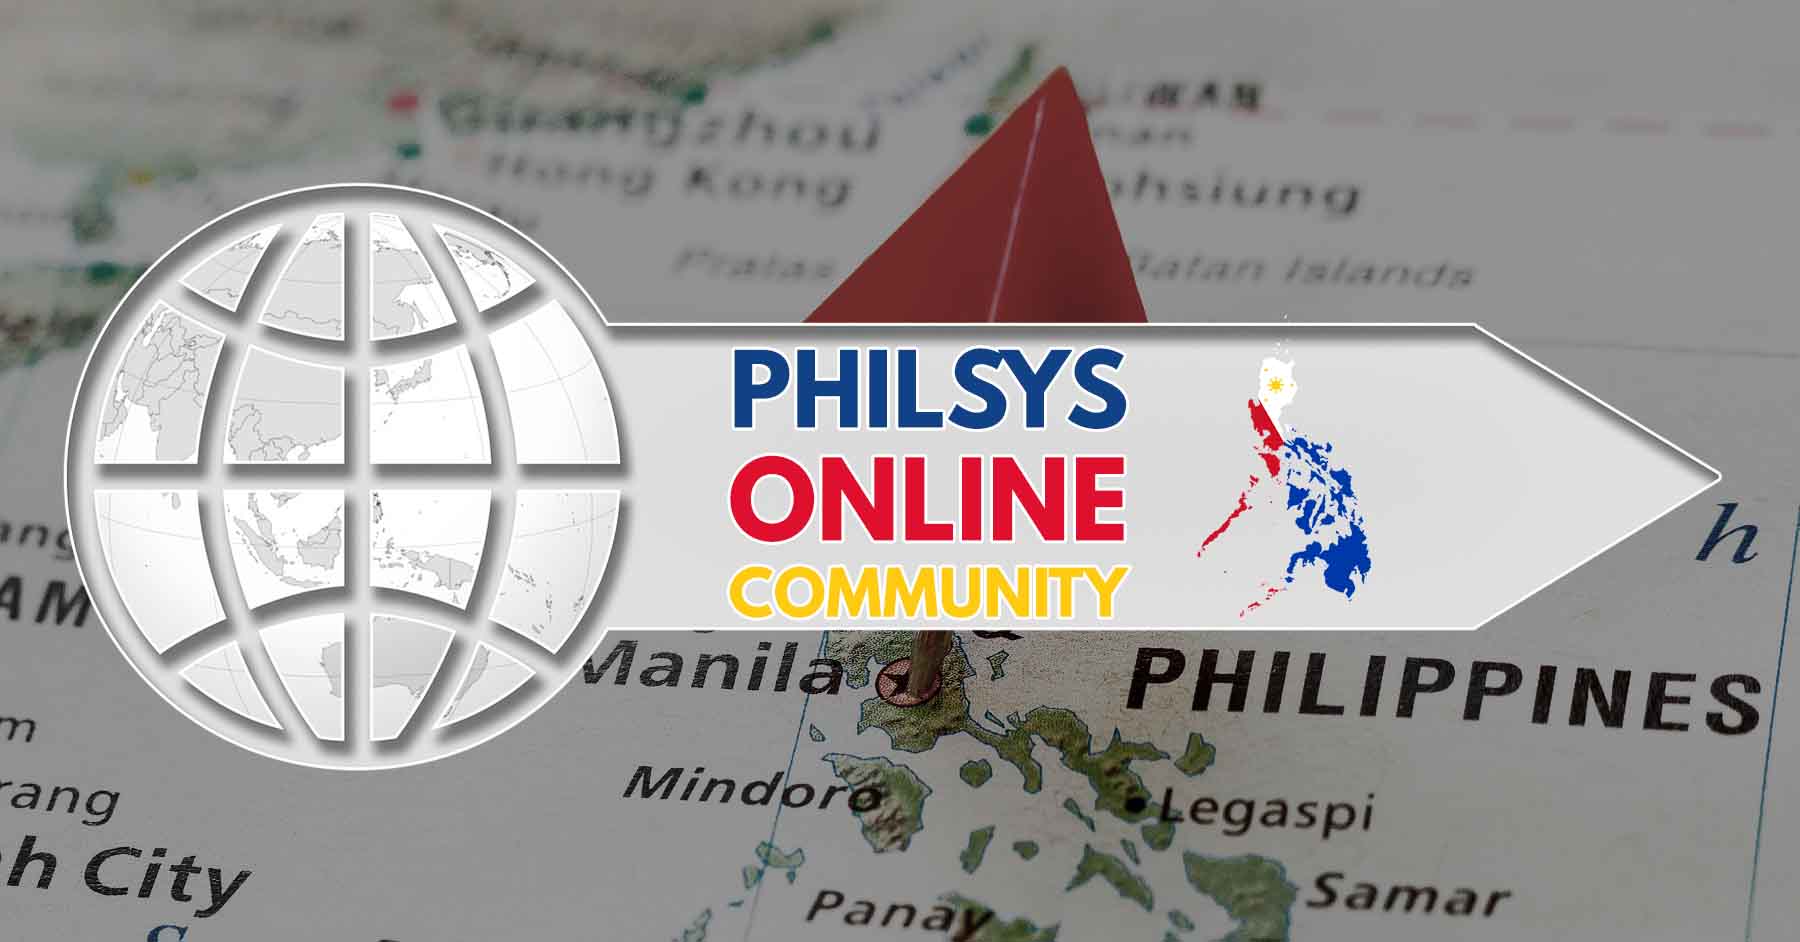 welcome to philsys online